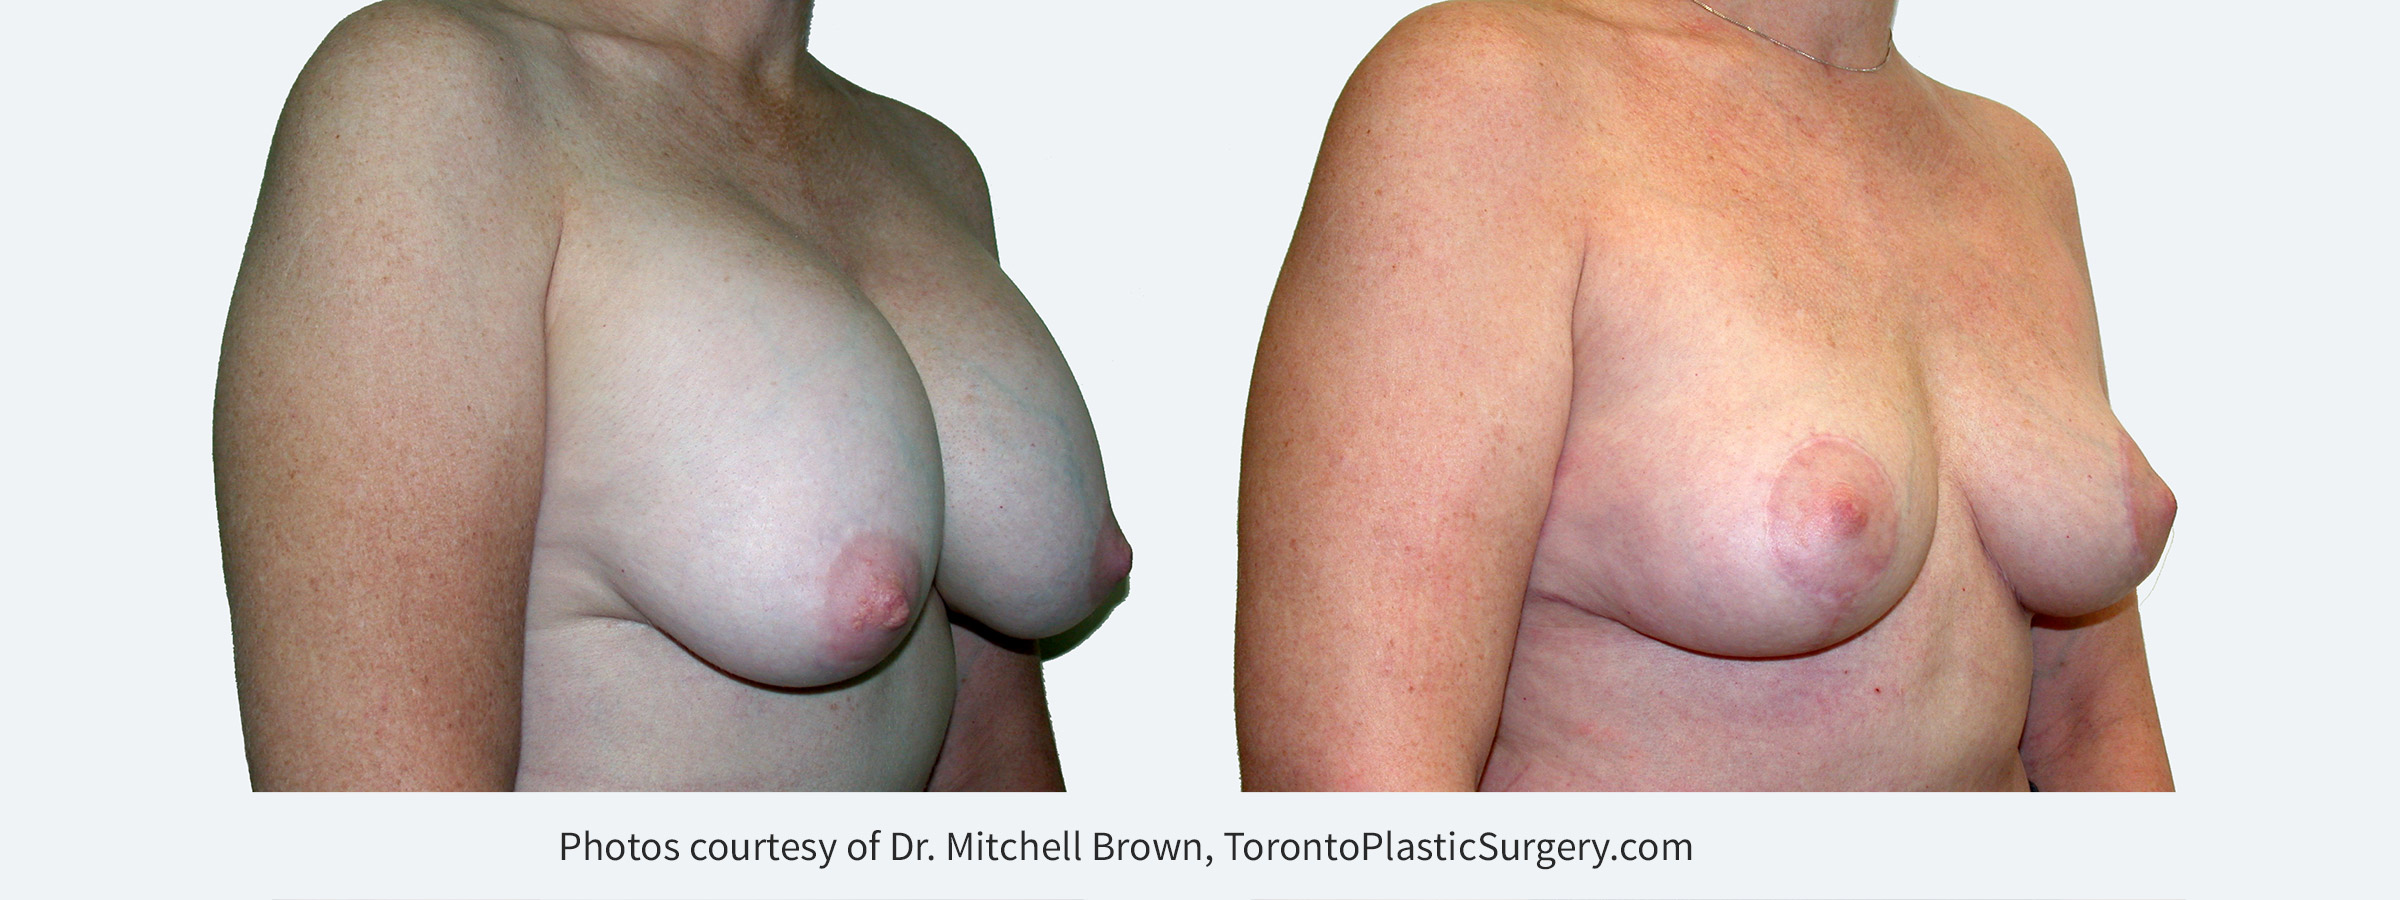 Recurrent capsular contracture and sagging of the breast treated with implant removal and reshaping of the breasts with a breast lift and fat grafting. Before and 6 months after.